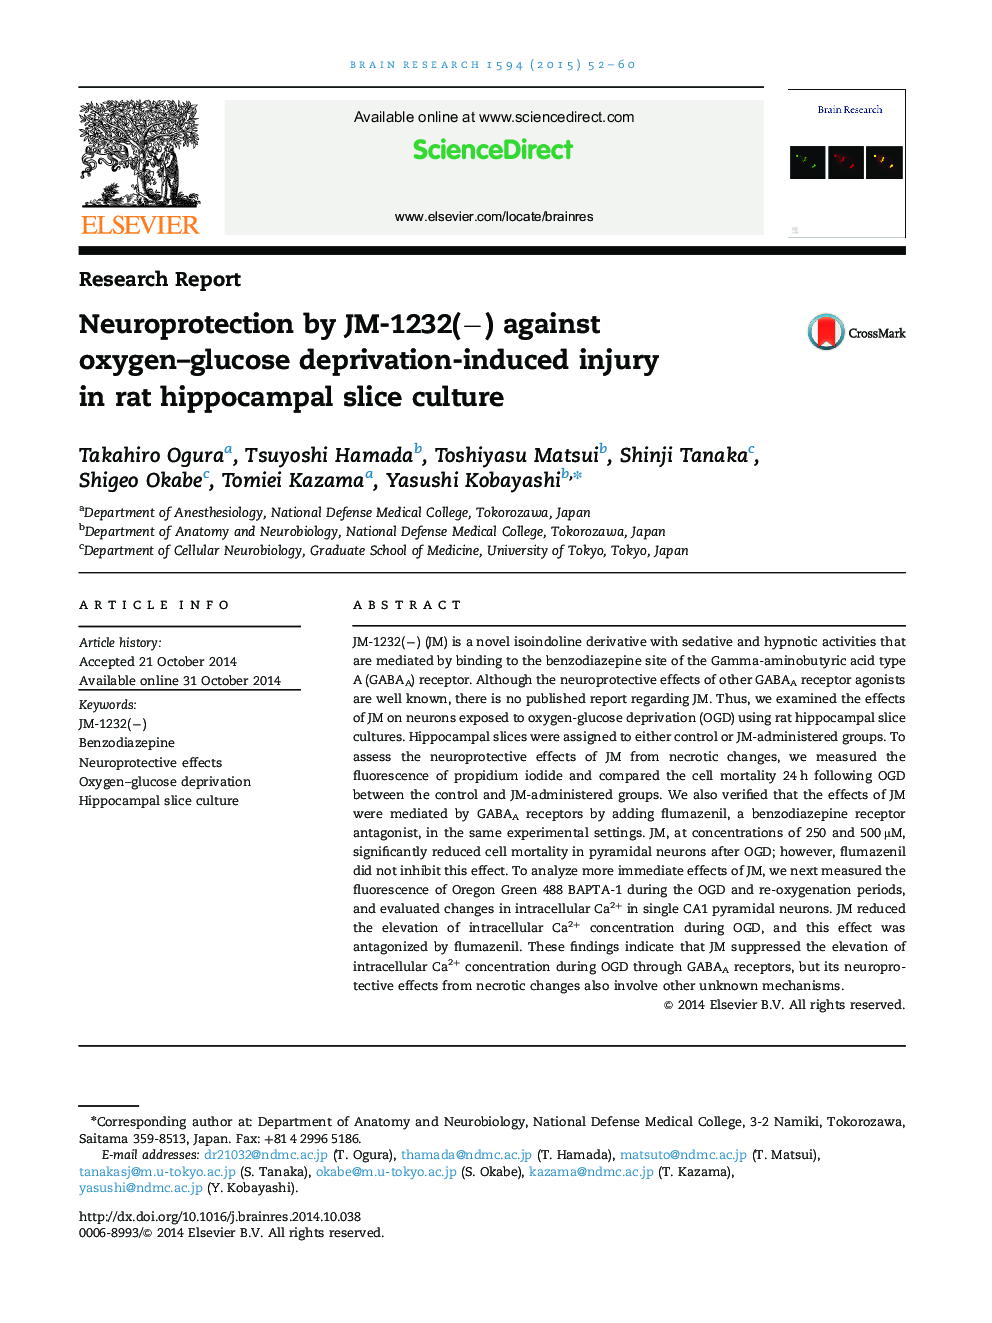 Neuroprotection by JM-1232(−) against oxygen–glucose deprivation-induced injury in rat hippocampal slice culture